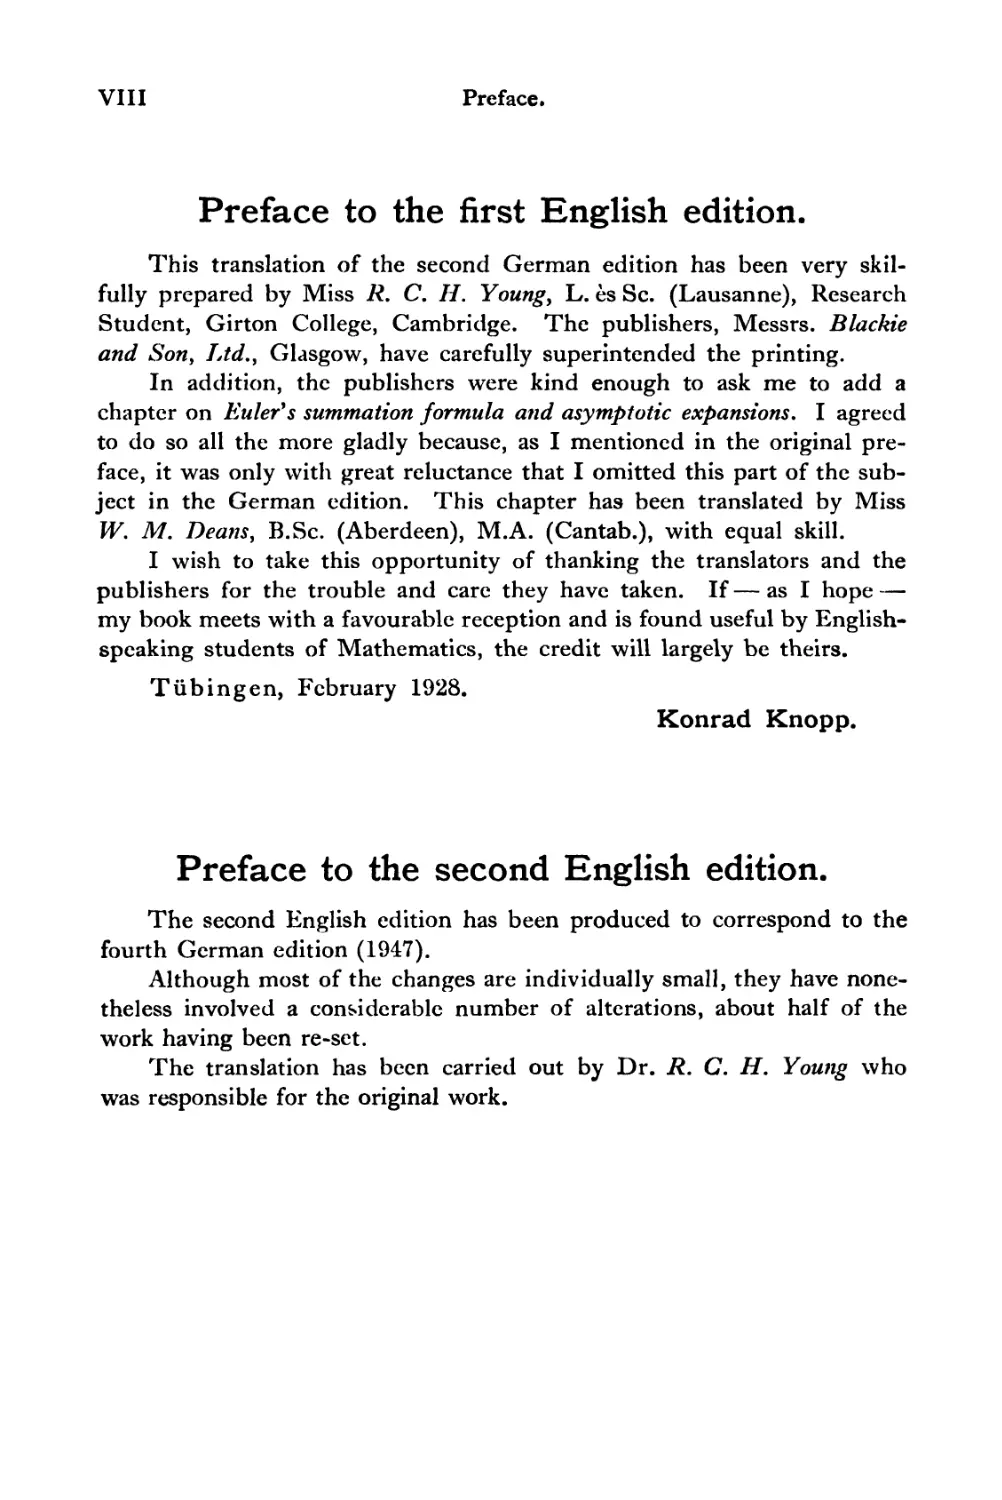 Preface to the first English edition
Preface to the second English edition